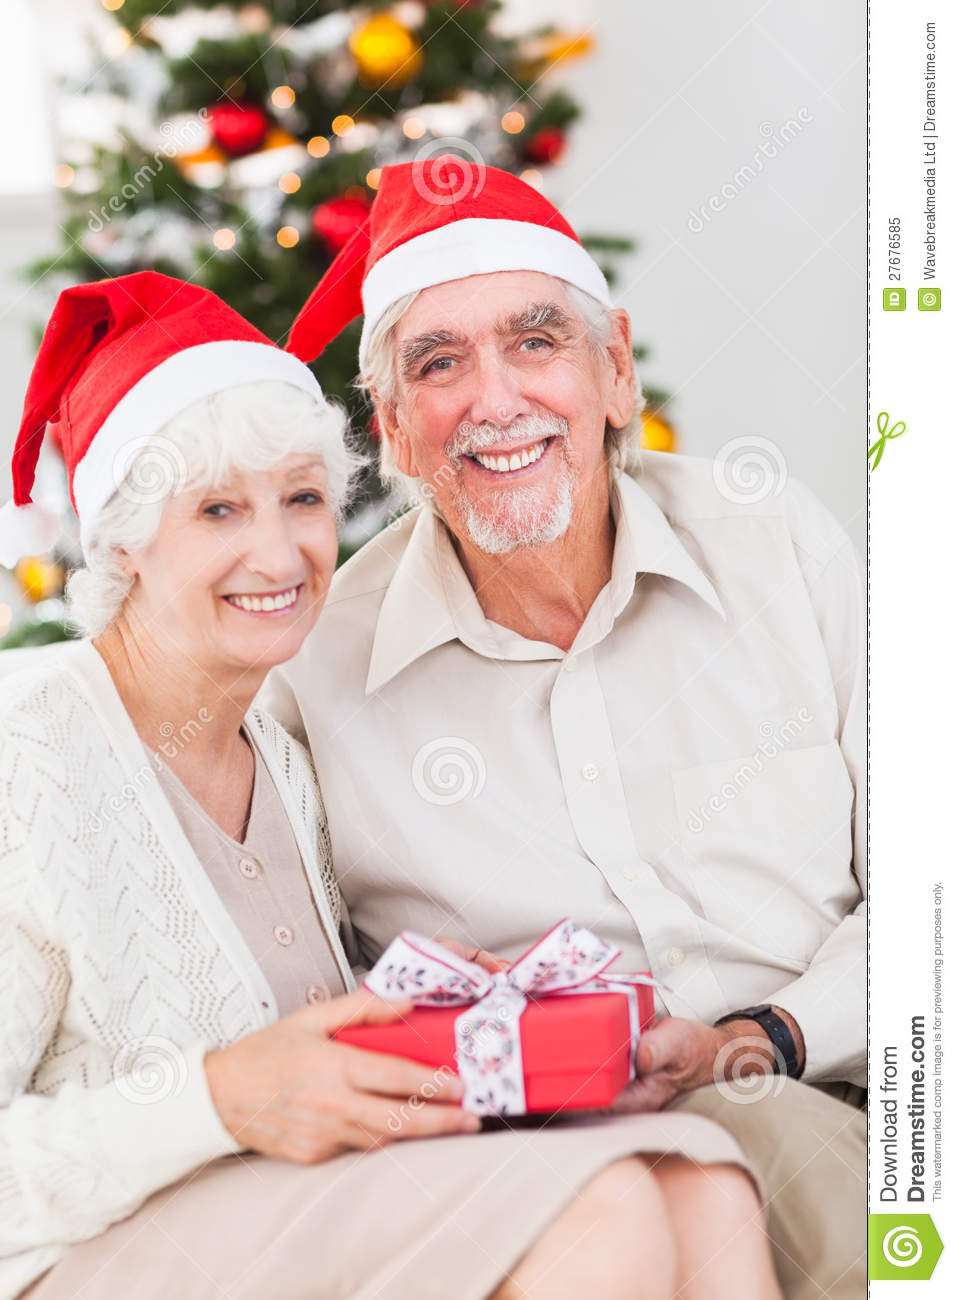 Christmas Gift Ideas For Older Couples
 Smiling Old Couple Swapping Christmas Gifts Stock Image